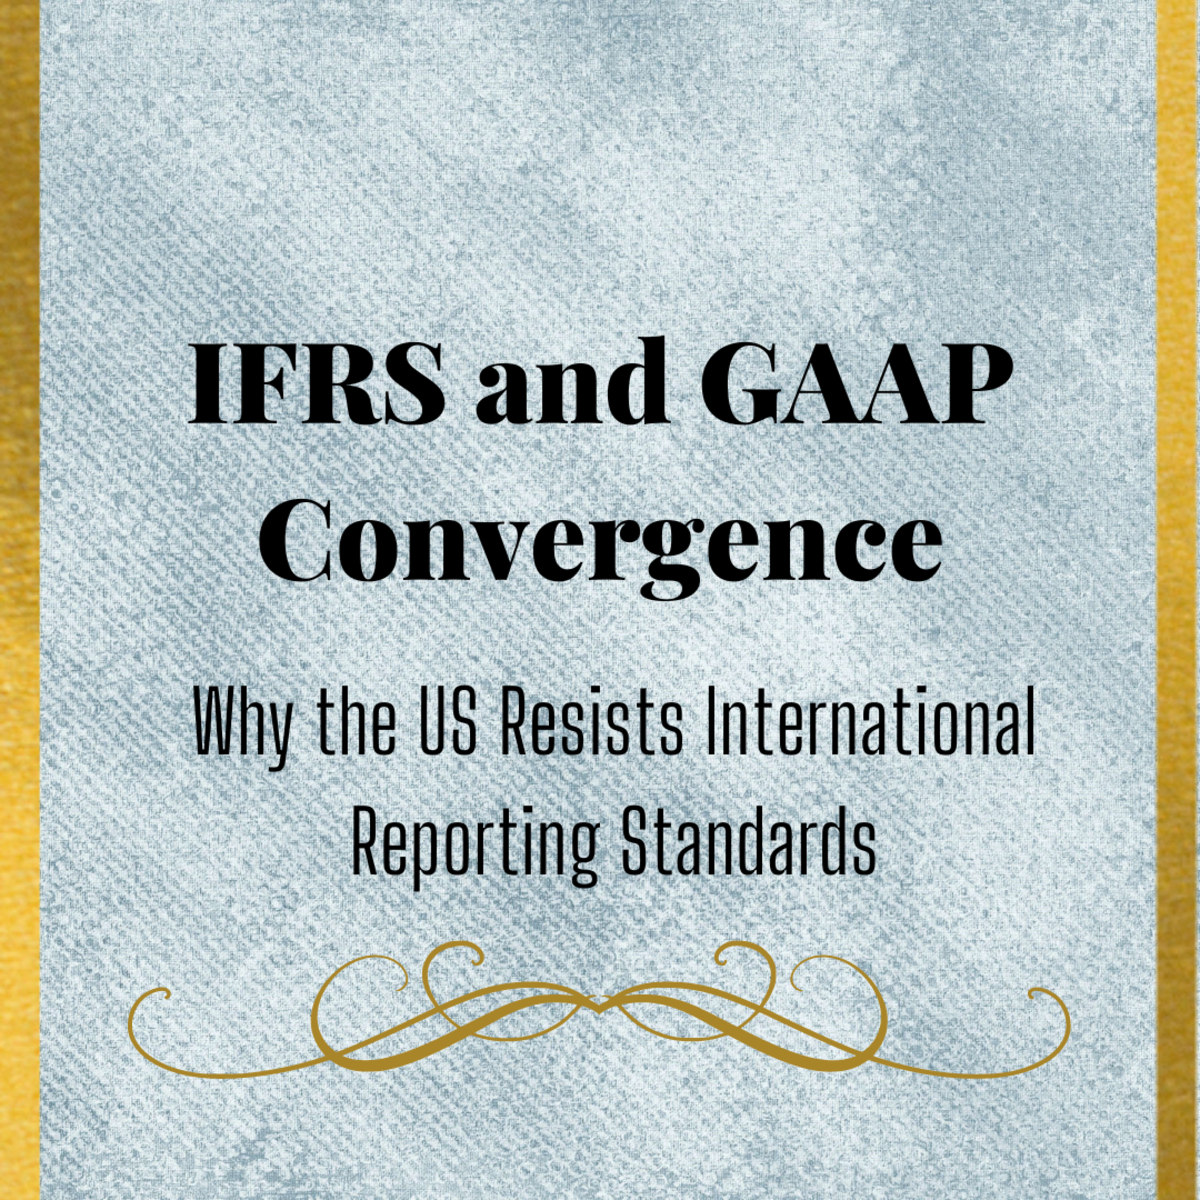 IFRS and GAAP Convergence: Why the US Resists International Reporting Standards